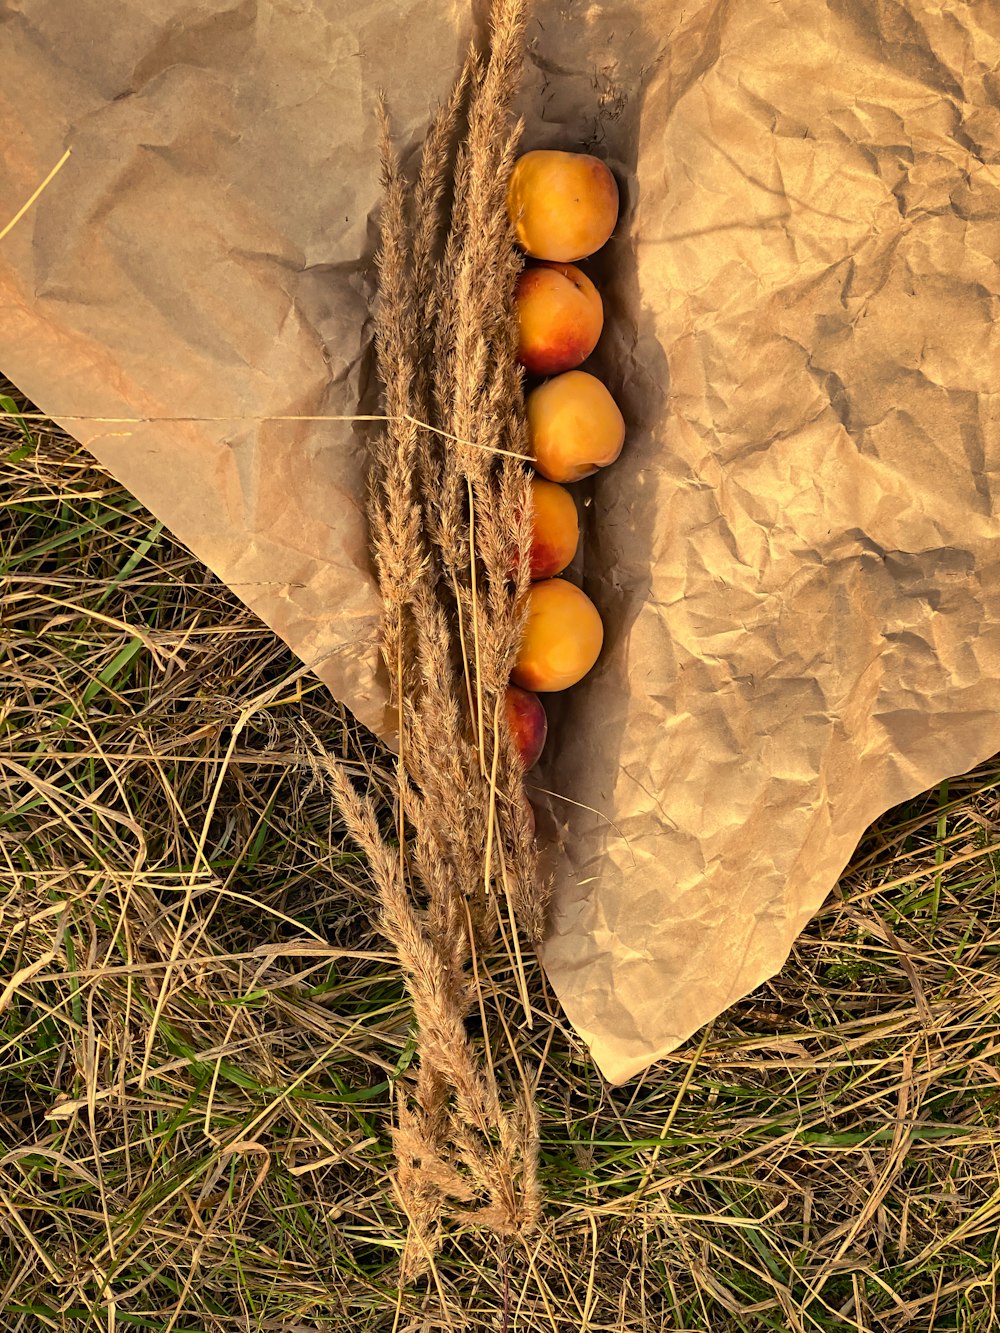 brown round fruits on brown paper bag